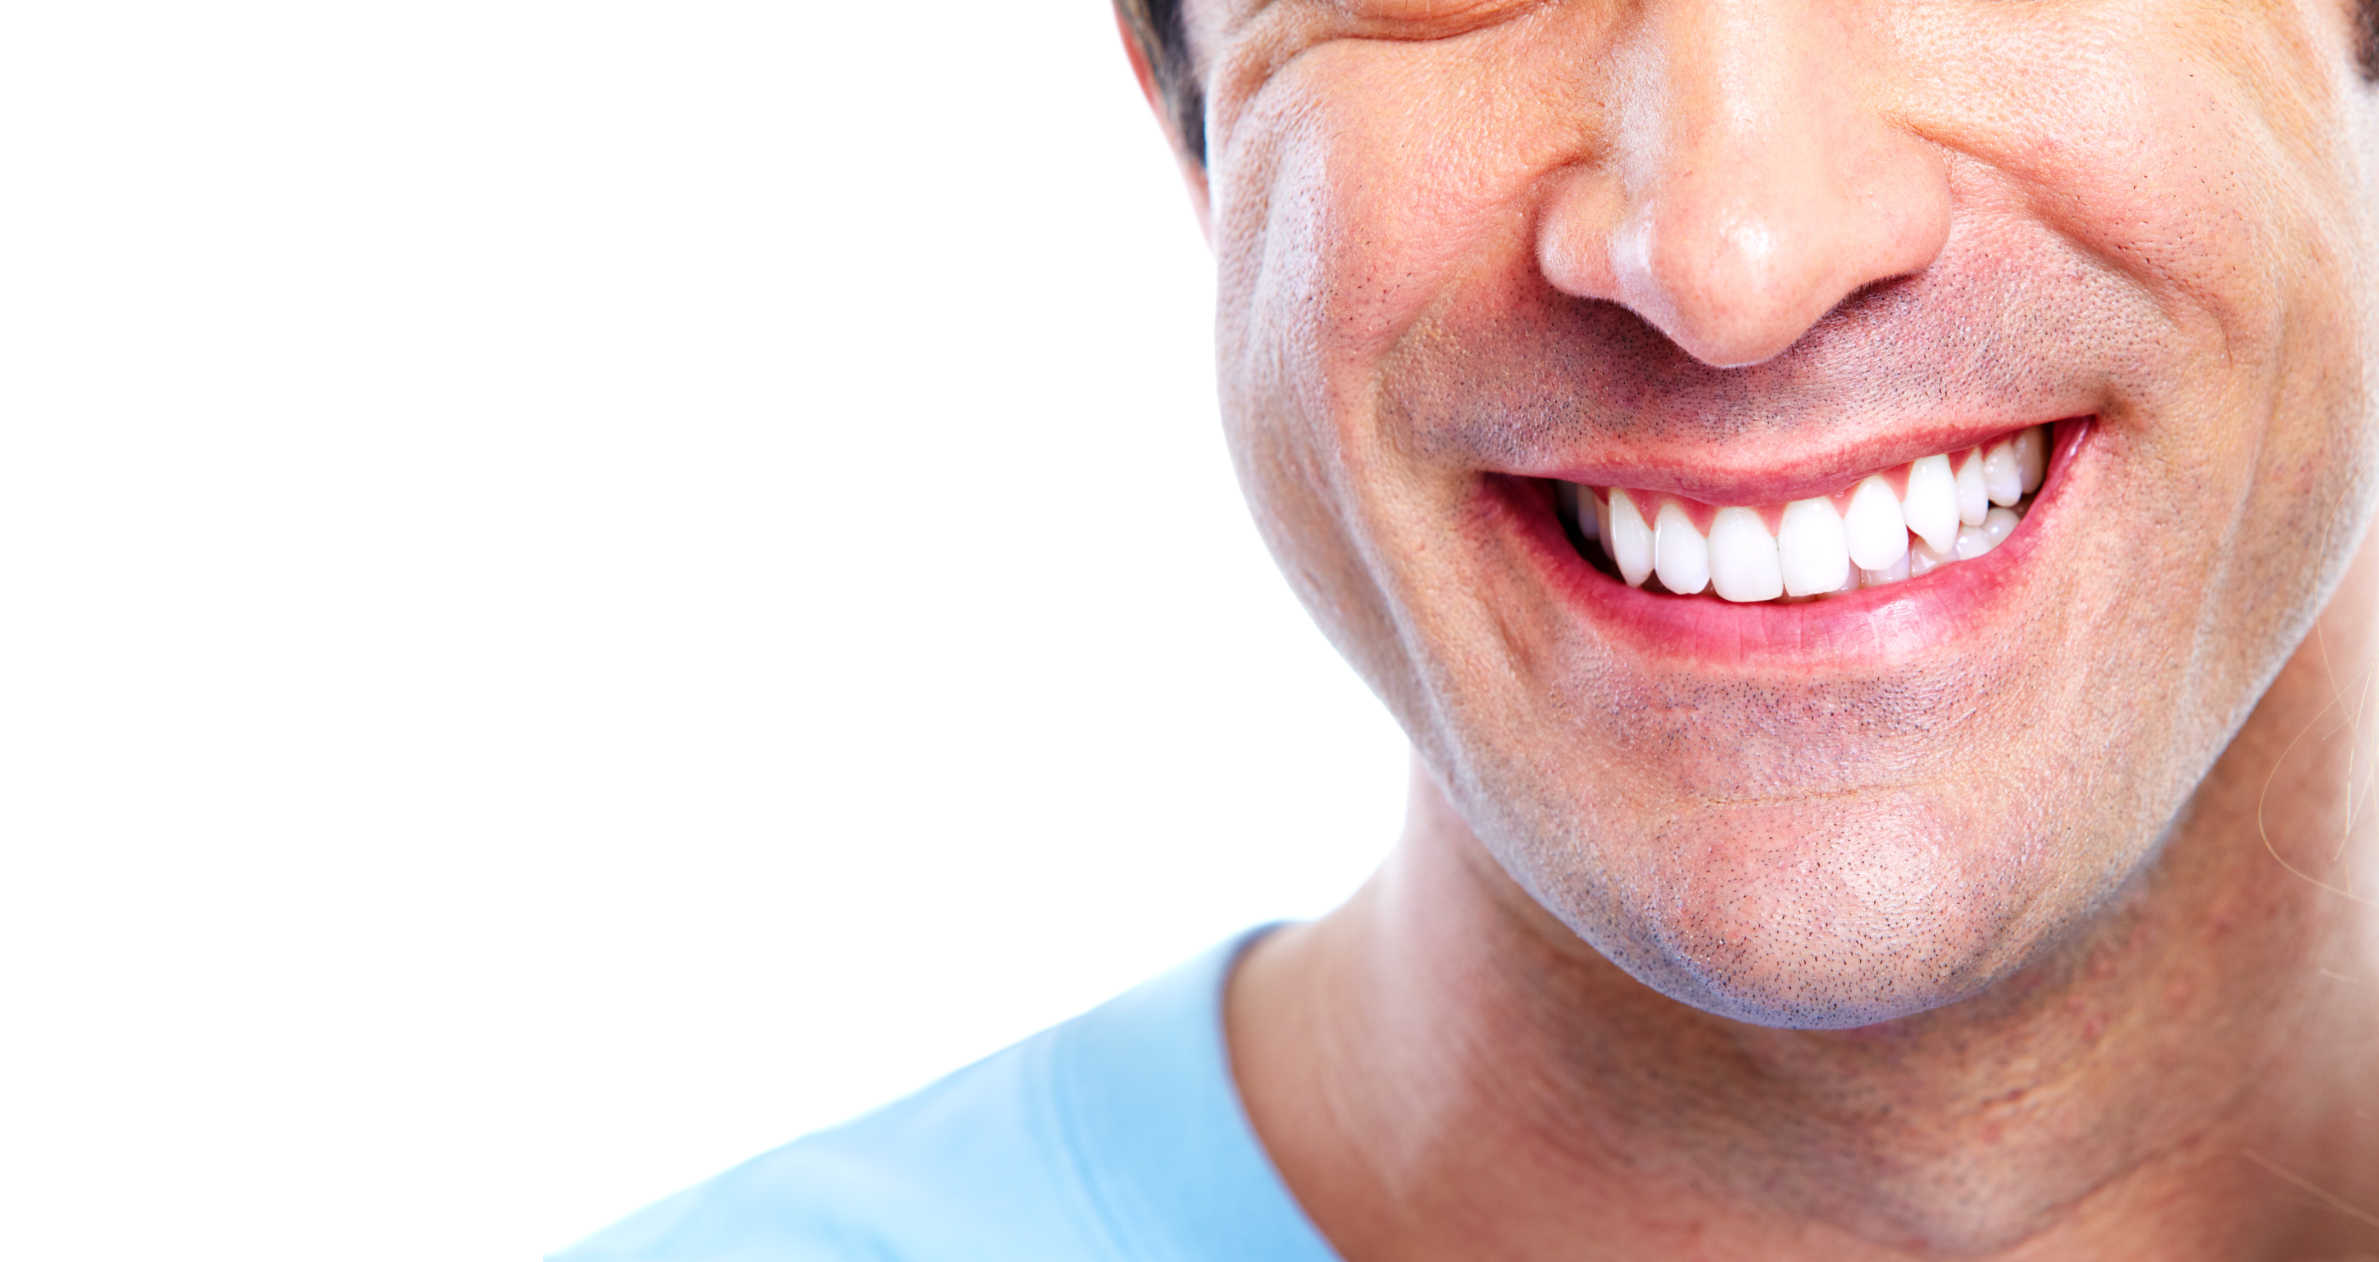 Tooth Replacement, Which Option Is Best for You